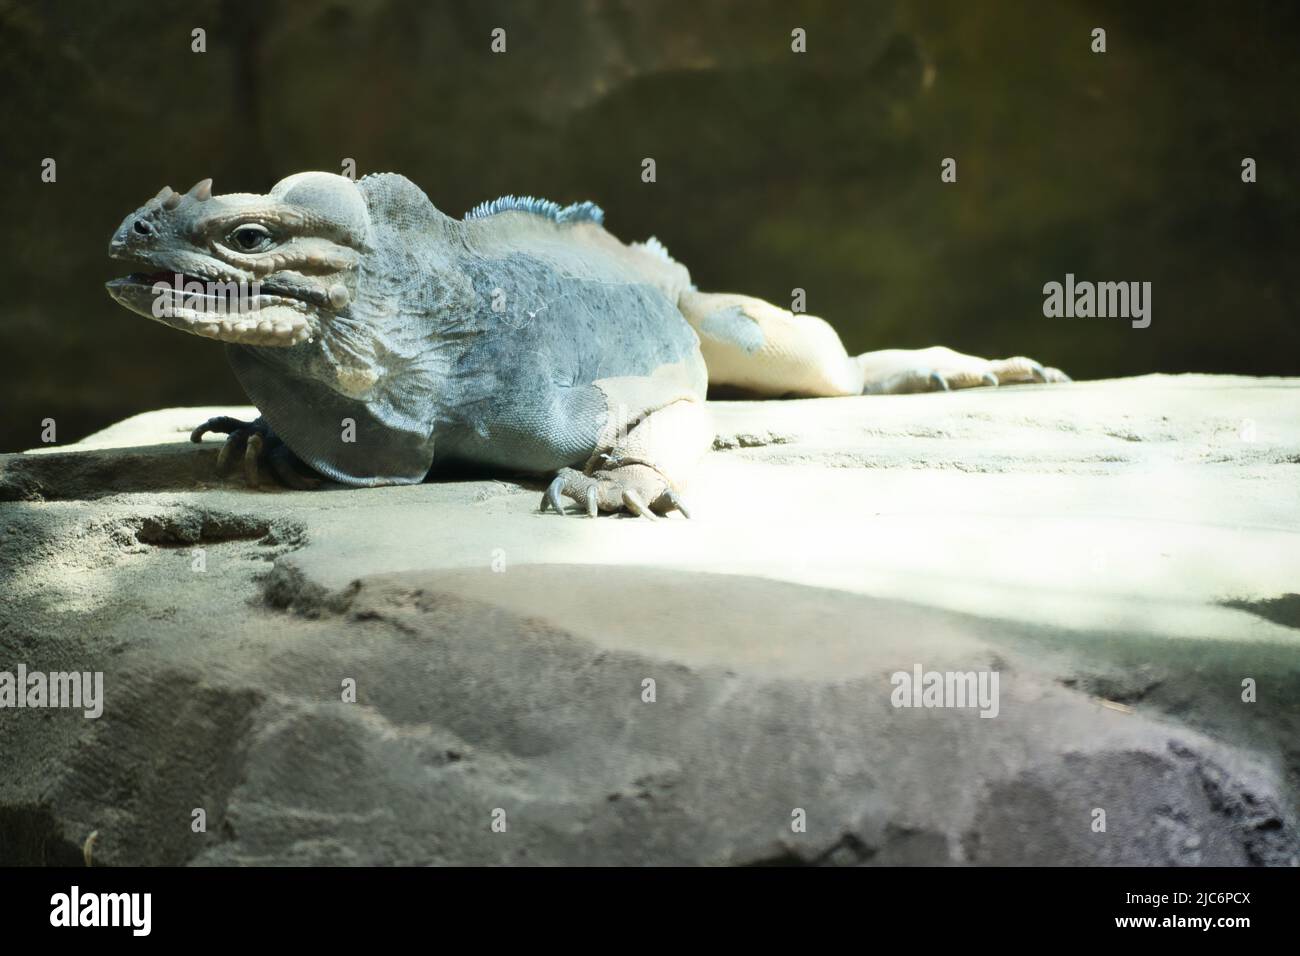 large iguana lying on a stone. Thorny comb and scaly skin. Animal photo of a reptile Stock Photo